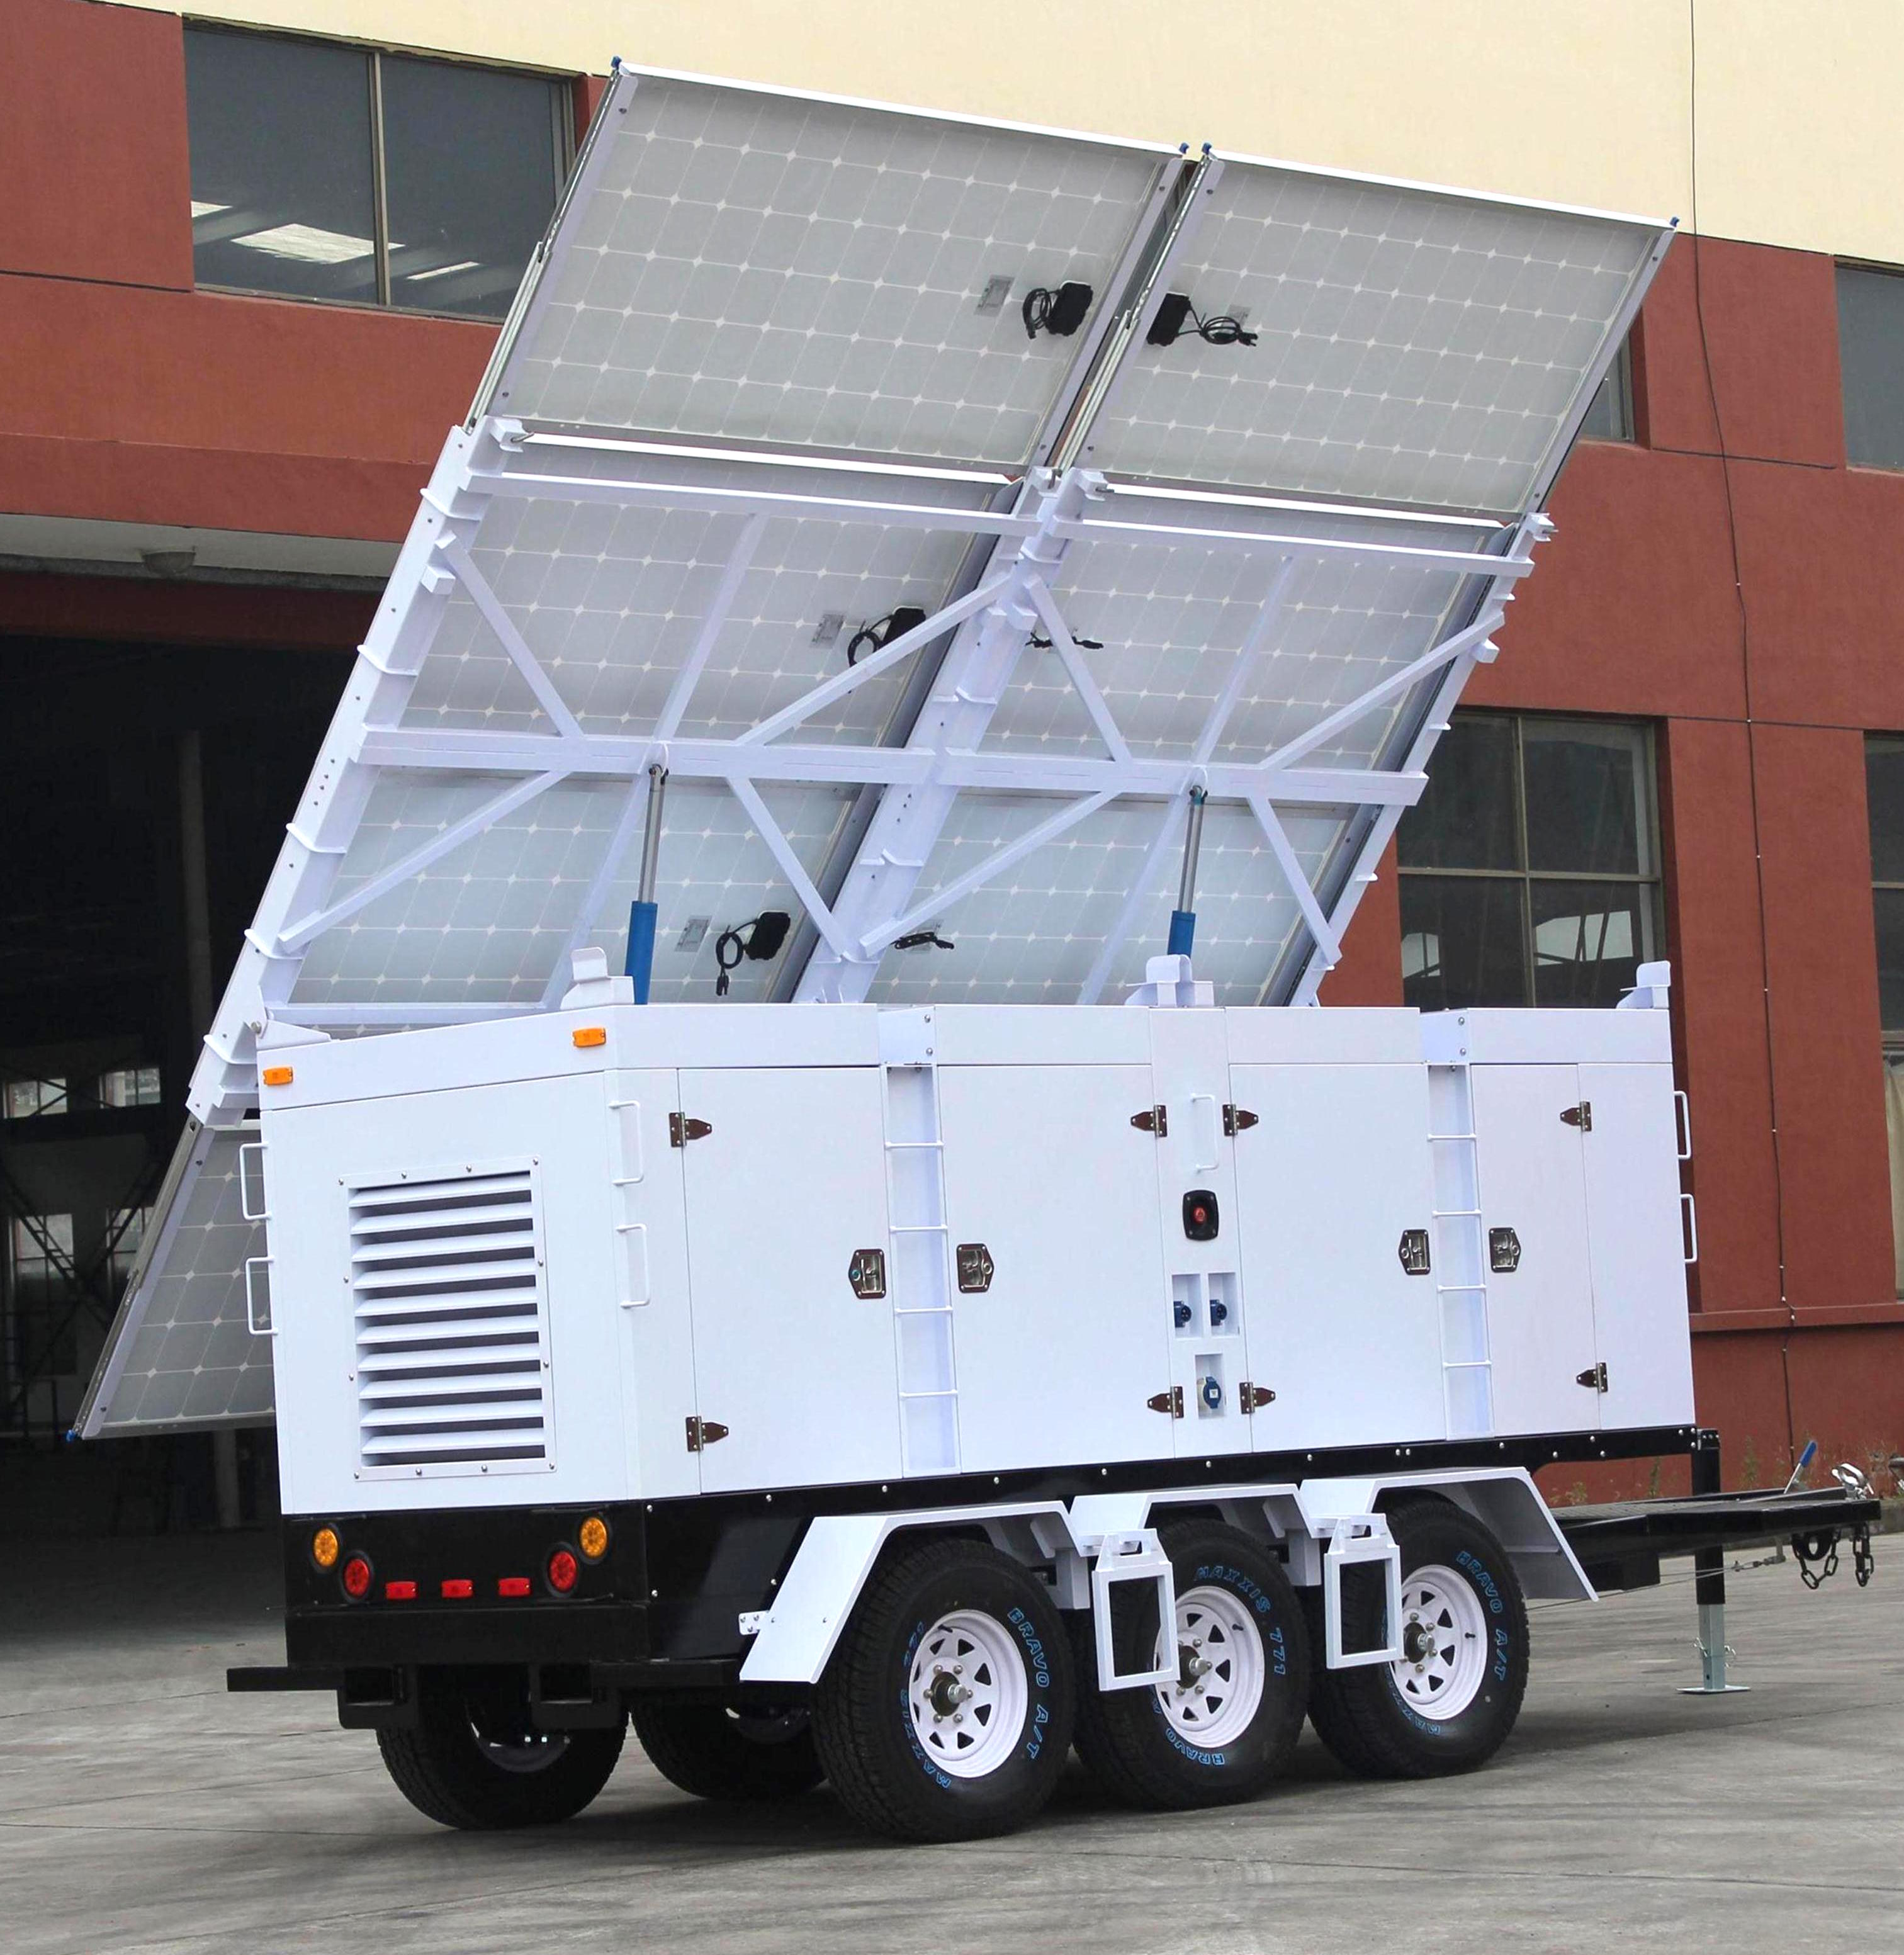 Solar Powered Trailers, Solar Trailers, Solar Light Tower, Light Tower, Solar Light Tower Quadcon Containers, Solar Light Tower Quadcon Containers Solar Trailers, Solar Trailer Solar Light Tower Quadcon Containers. Used Through Out The United States and World wide by FEMA Federal Emergency Management Agency, DHS Department of Homeland Security, Disaster Recovery Efforts, Red Cross Disaster Relief, Disaster Preparedness & Recovery.